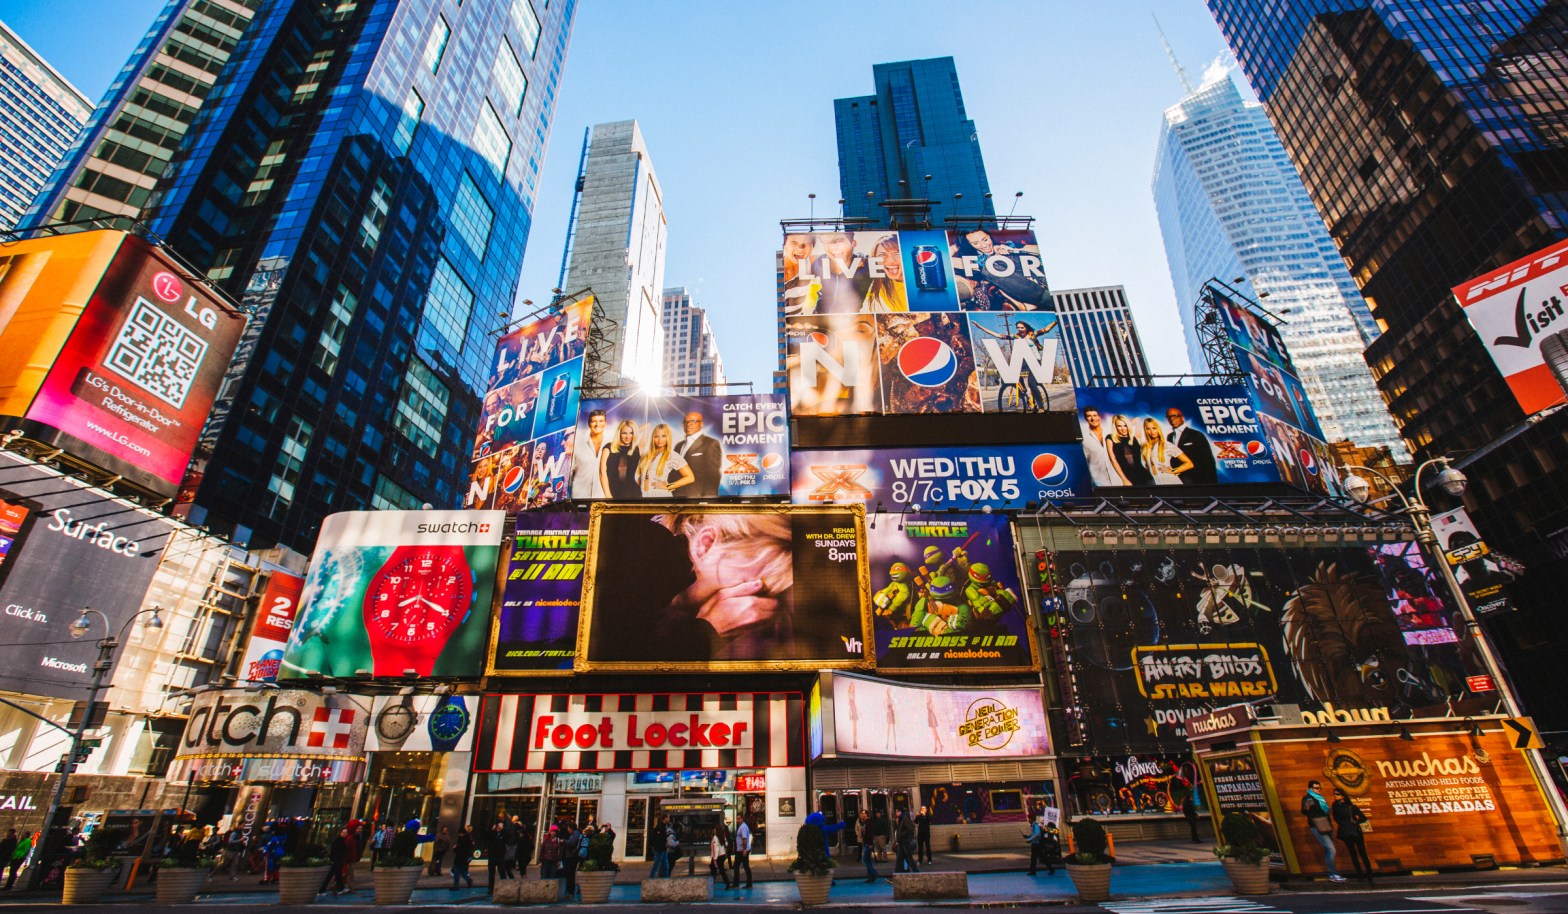 Marketing billboards in Times Square demonstrating the Marketing Rule